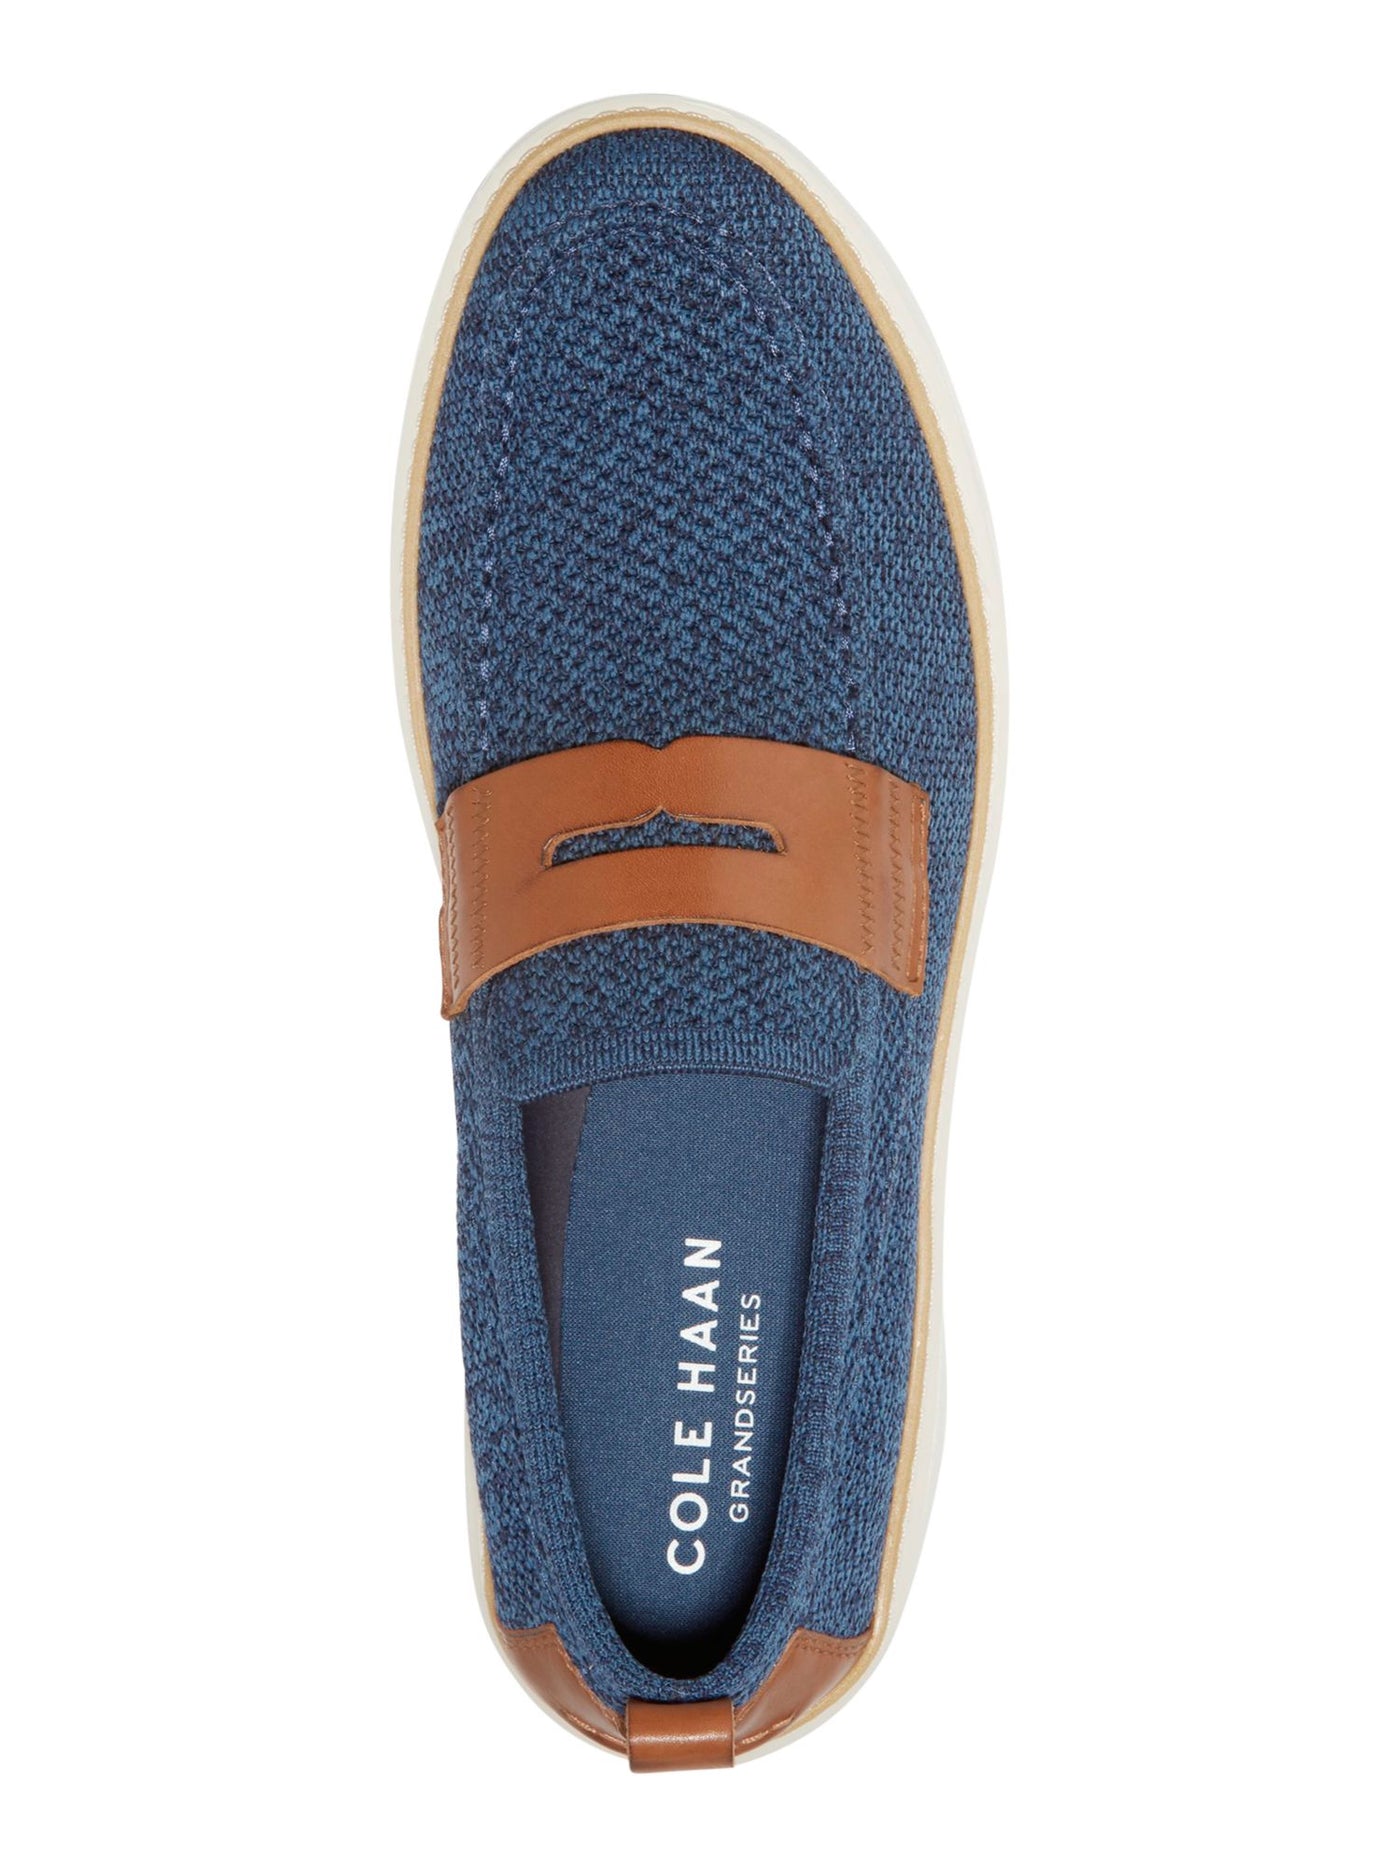 COLE HAAN GRANDSERIES Mens Blue Knit Contrast Penny Keeper Back Pull-Tab Cushioned Topspin Round Toe Wedge Slip On Loafers Shoes 13 M